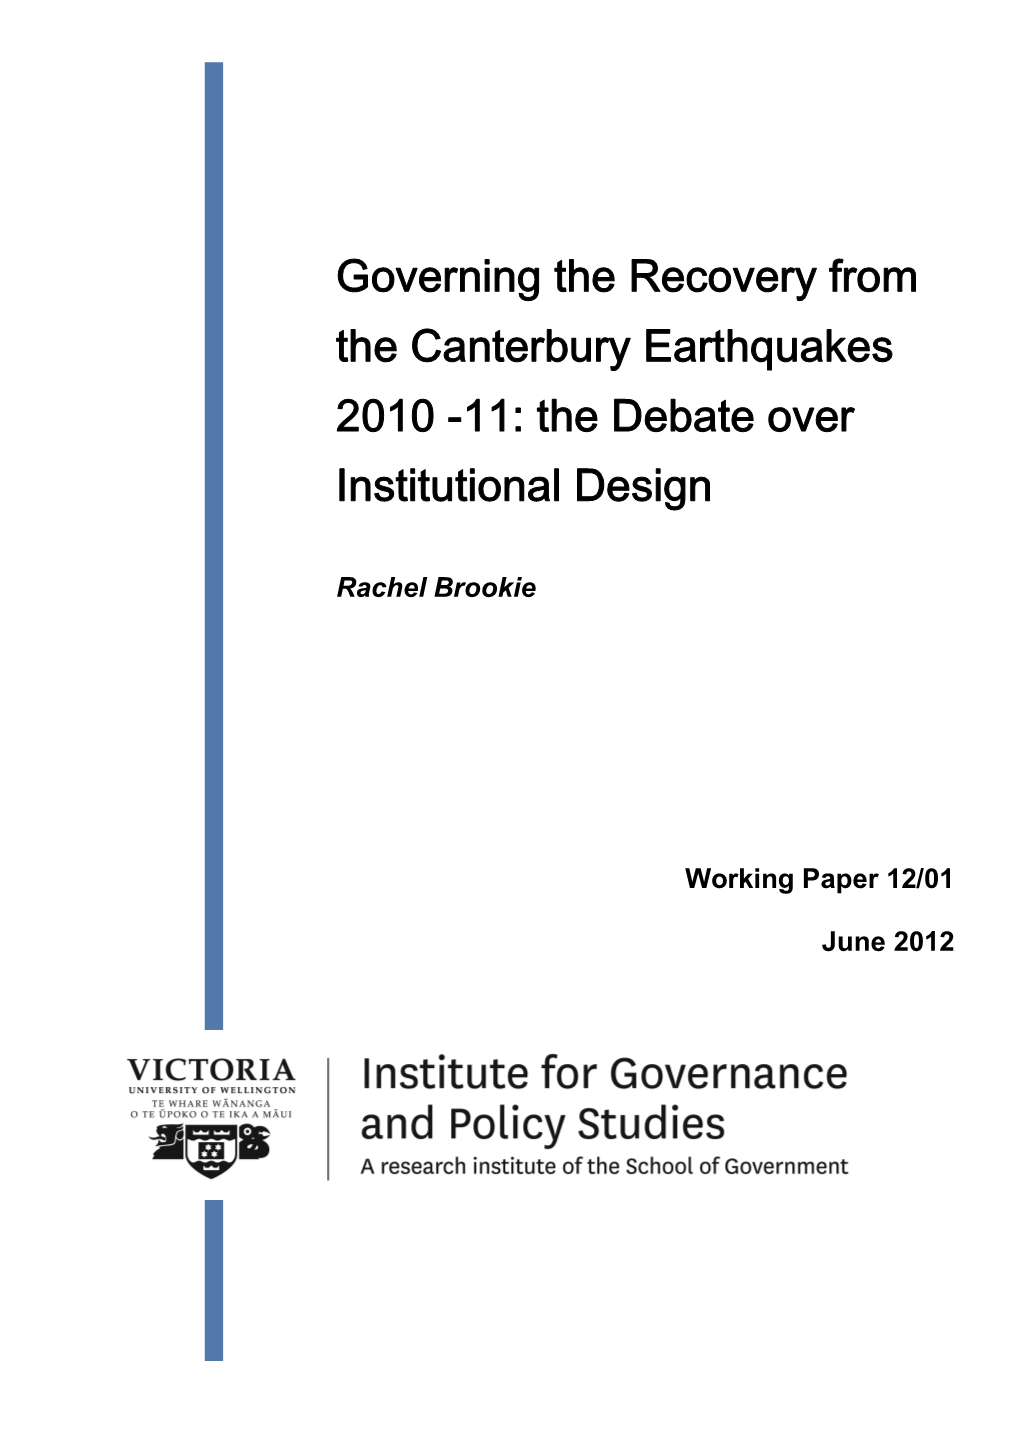 Governing the Recovery from the Canterbury Earthquakes 2010 -11: the Debate Over Institutional Design